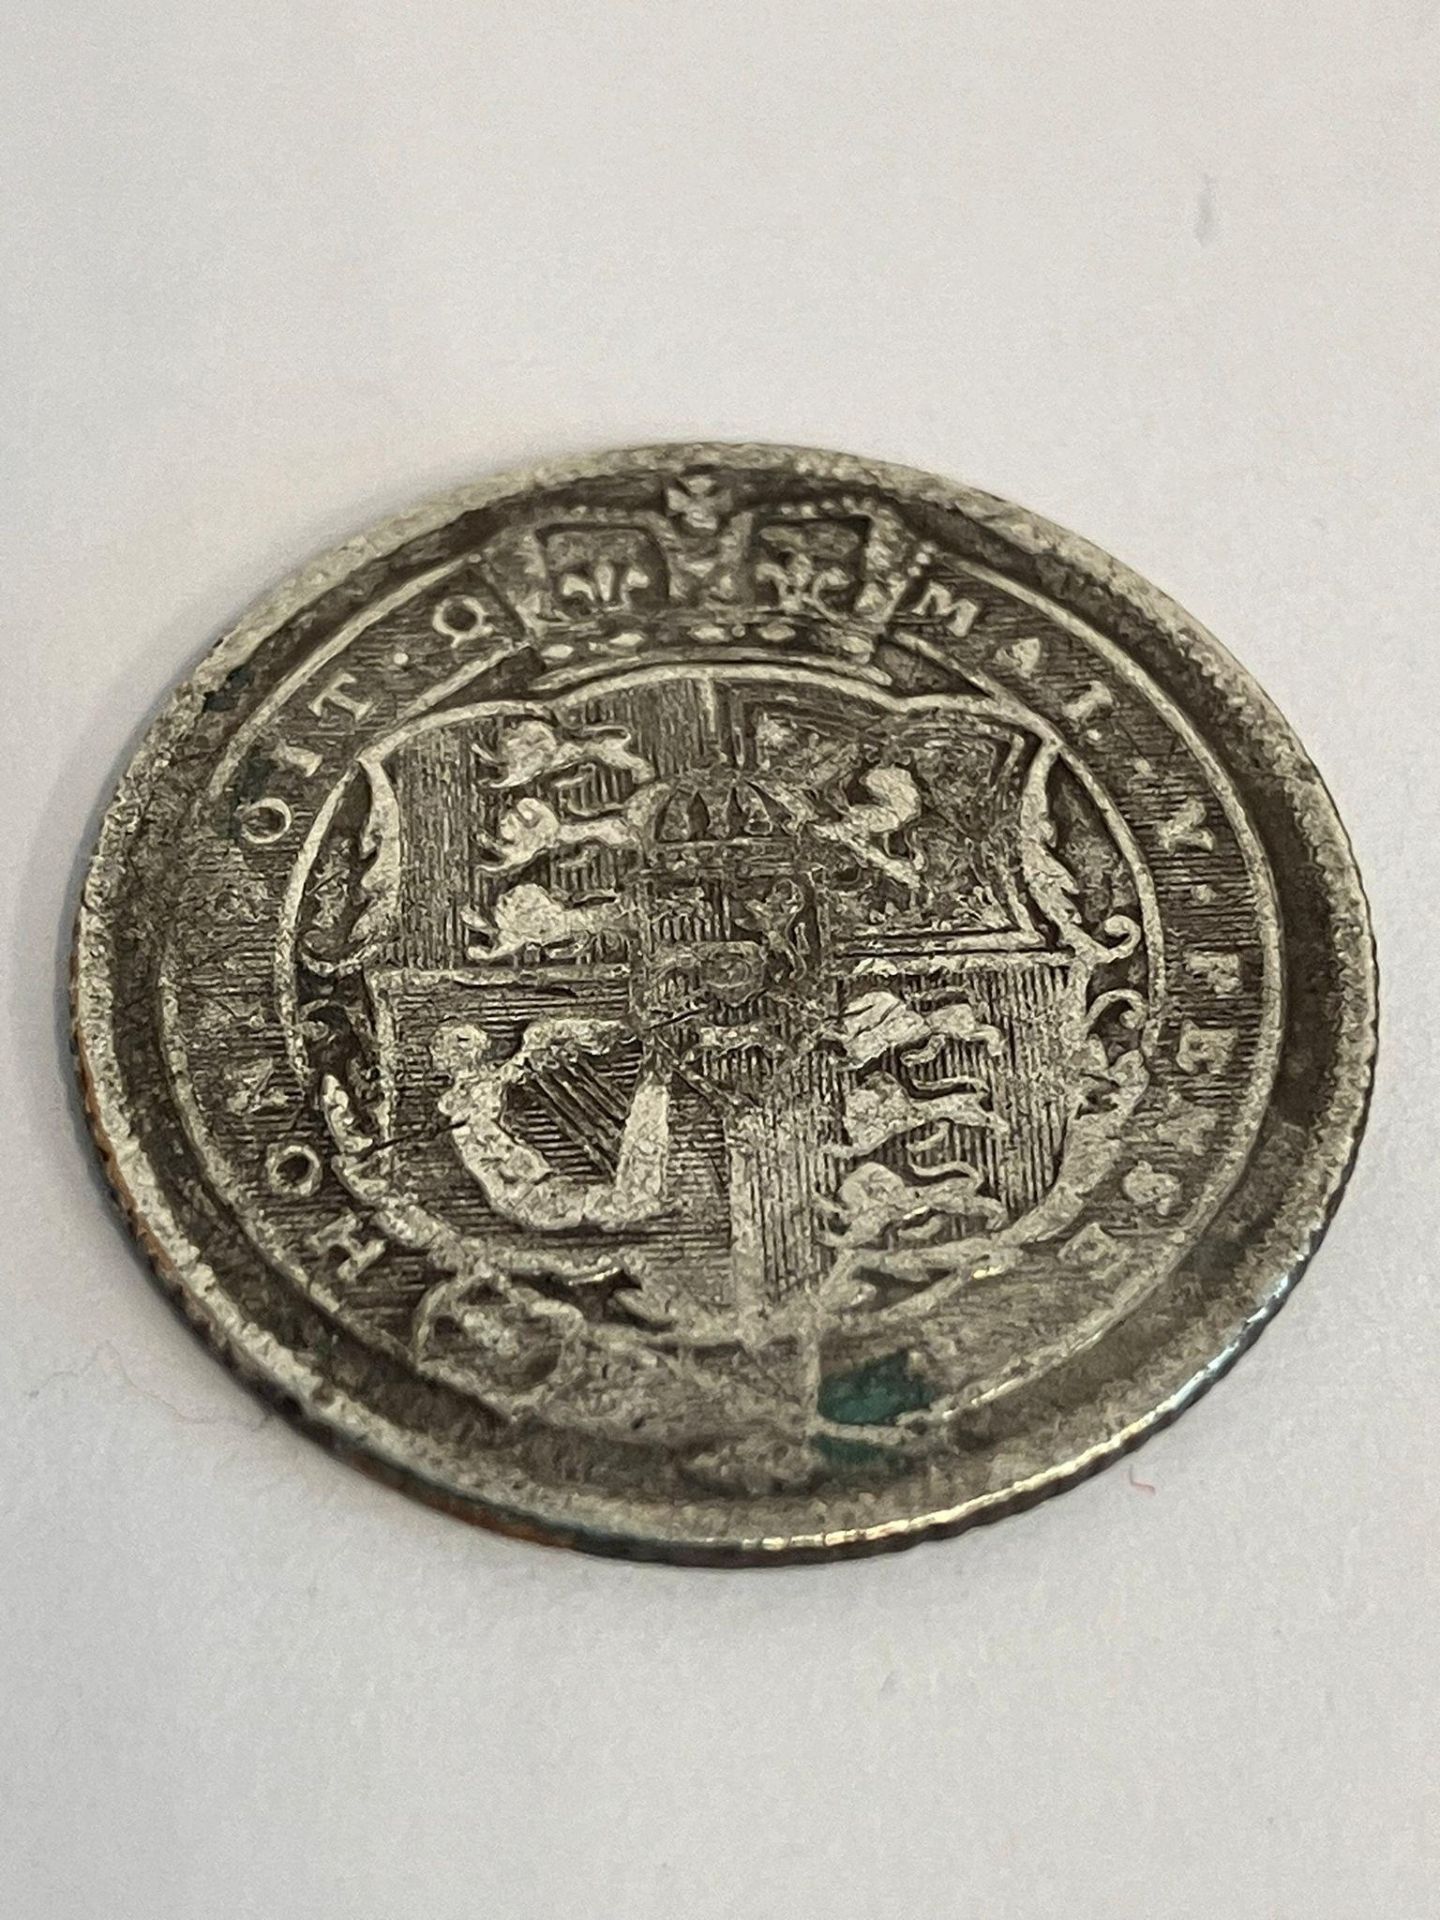 1818 GEORGE III SILVER SIXPENCE. condition fine/very fine, could use a clean. - Image 2 of 3